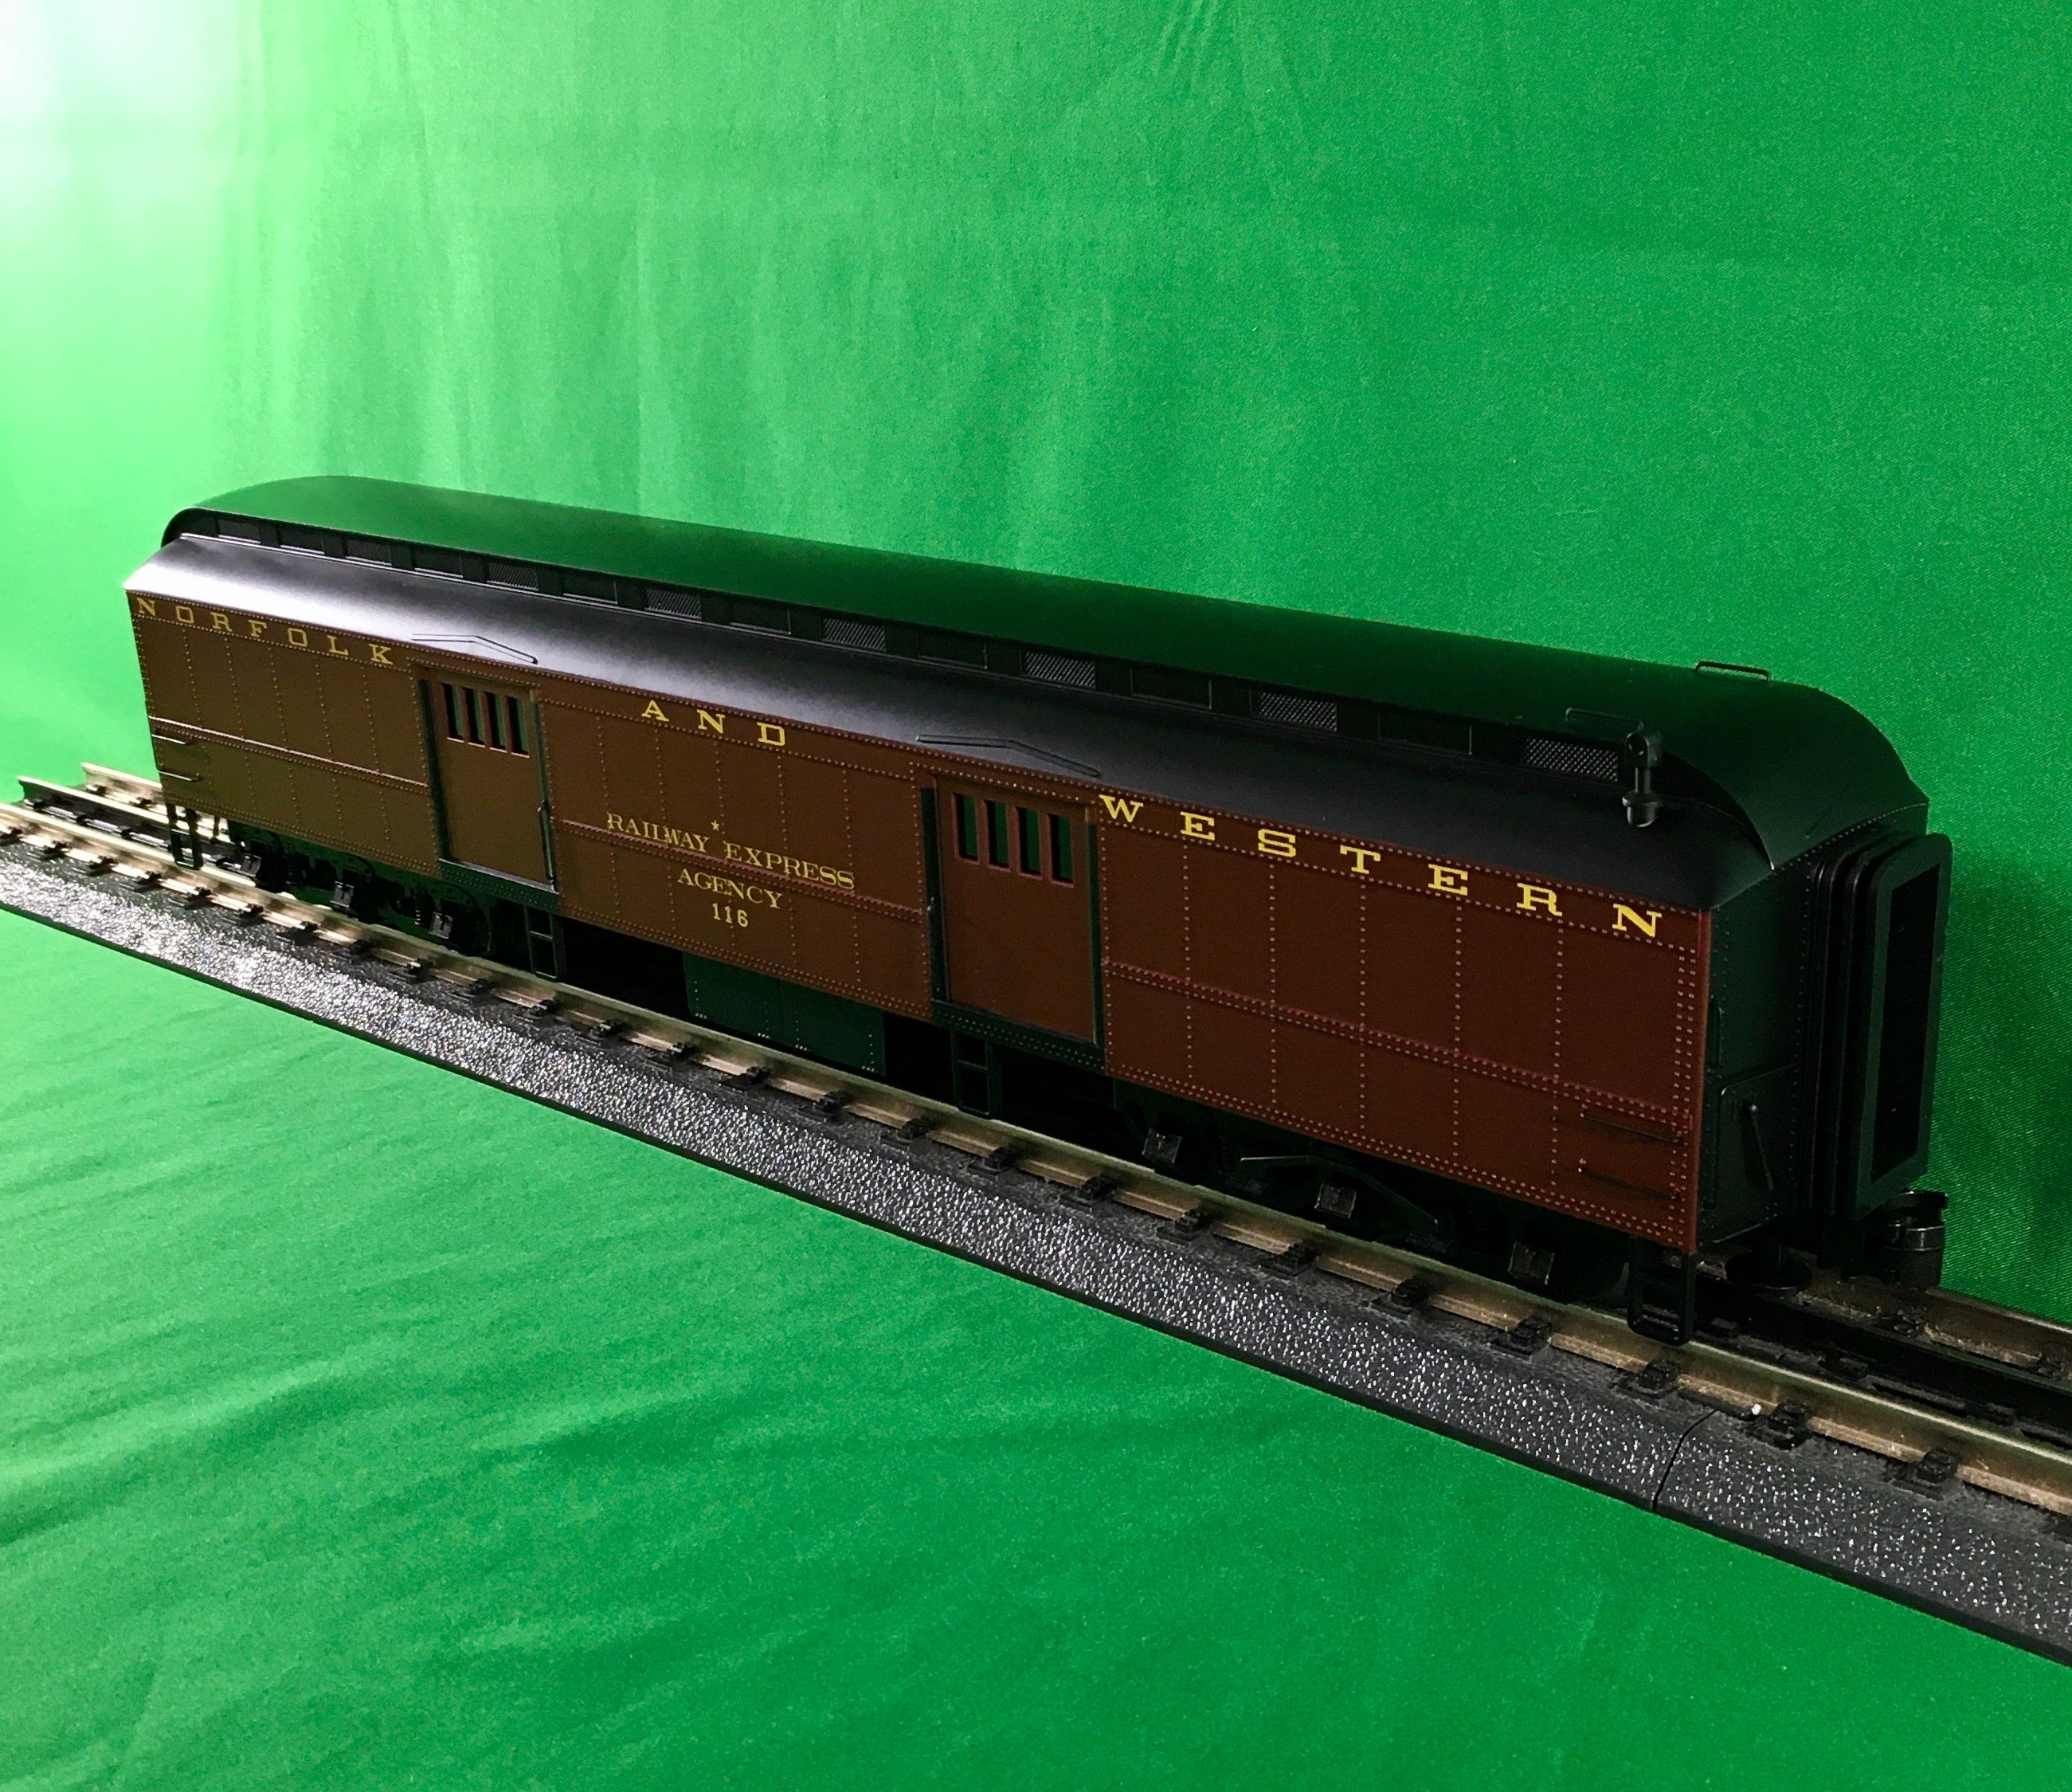 Sold at Auction: MTH 70' Streamlined C&O The Chessie Passenger Cars